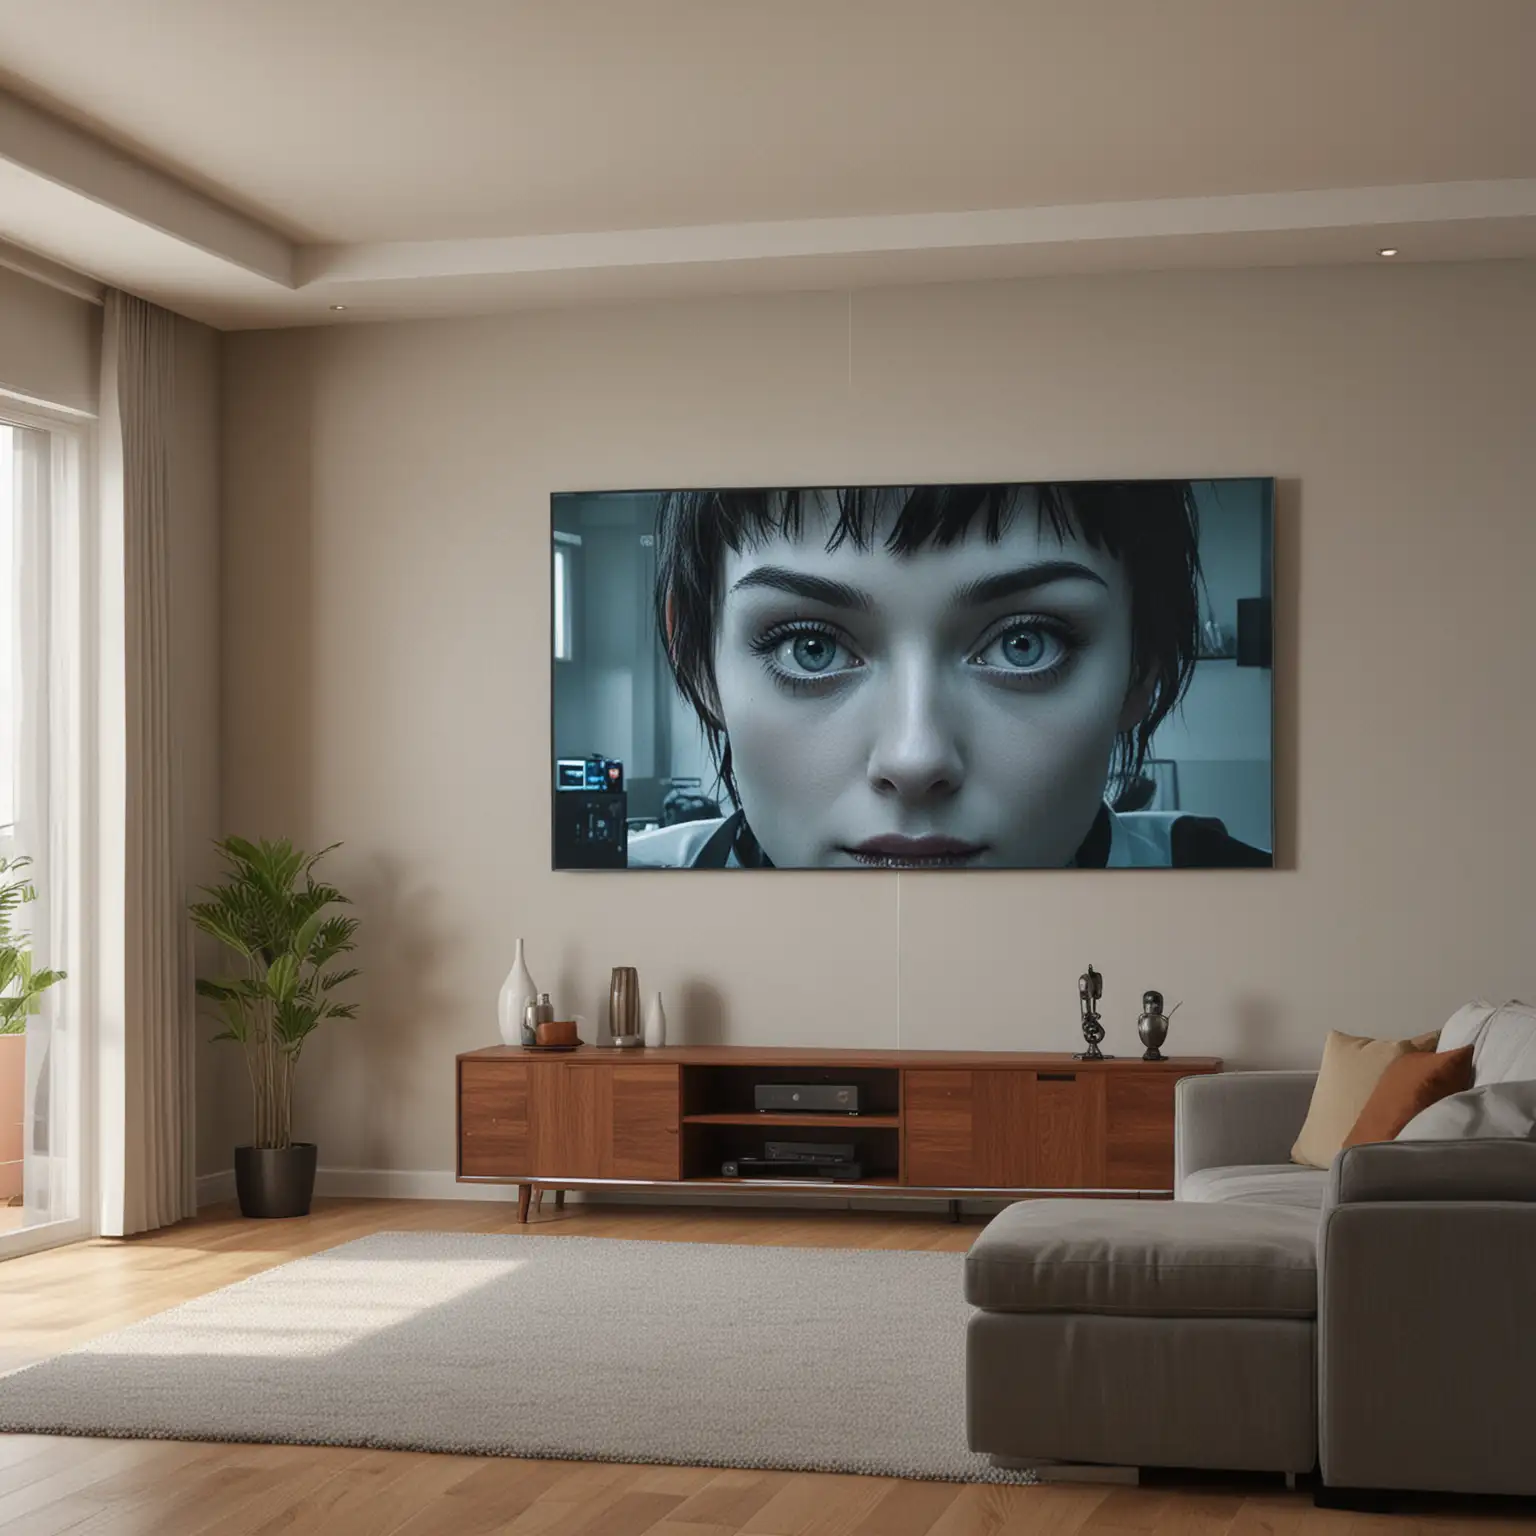 a living room scene with television screen depicting a human with obvious robot features. eye level perspective
--ar 2:3 --sref https://s.mj.run/87Sjf94hFiI ::1.5 <https://s.mj.run/BdQFQve9VPQ>